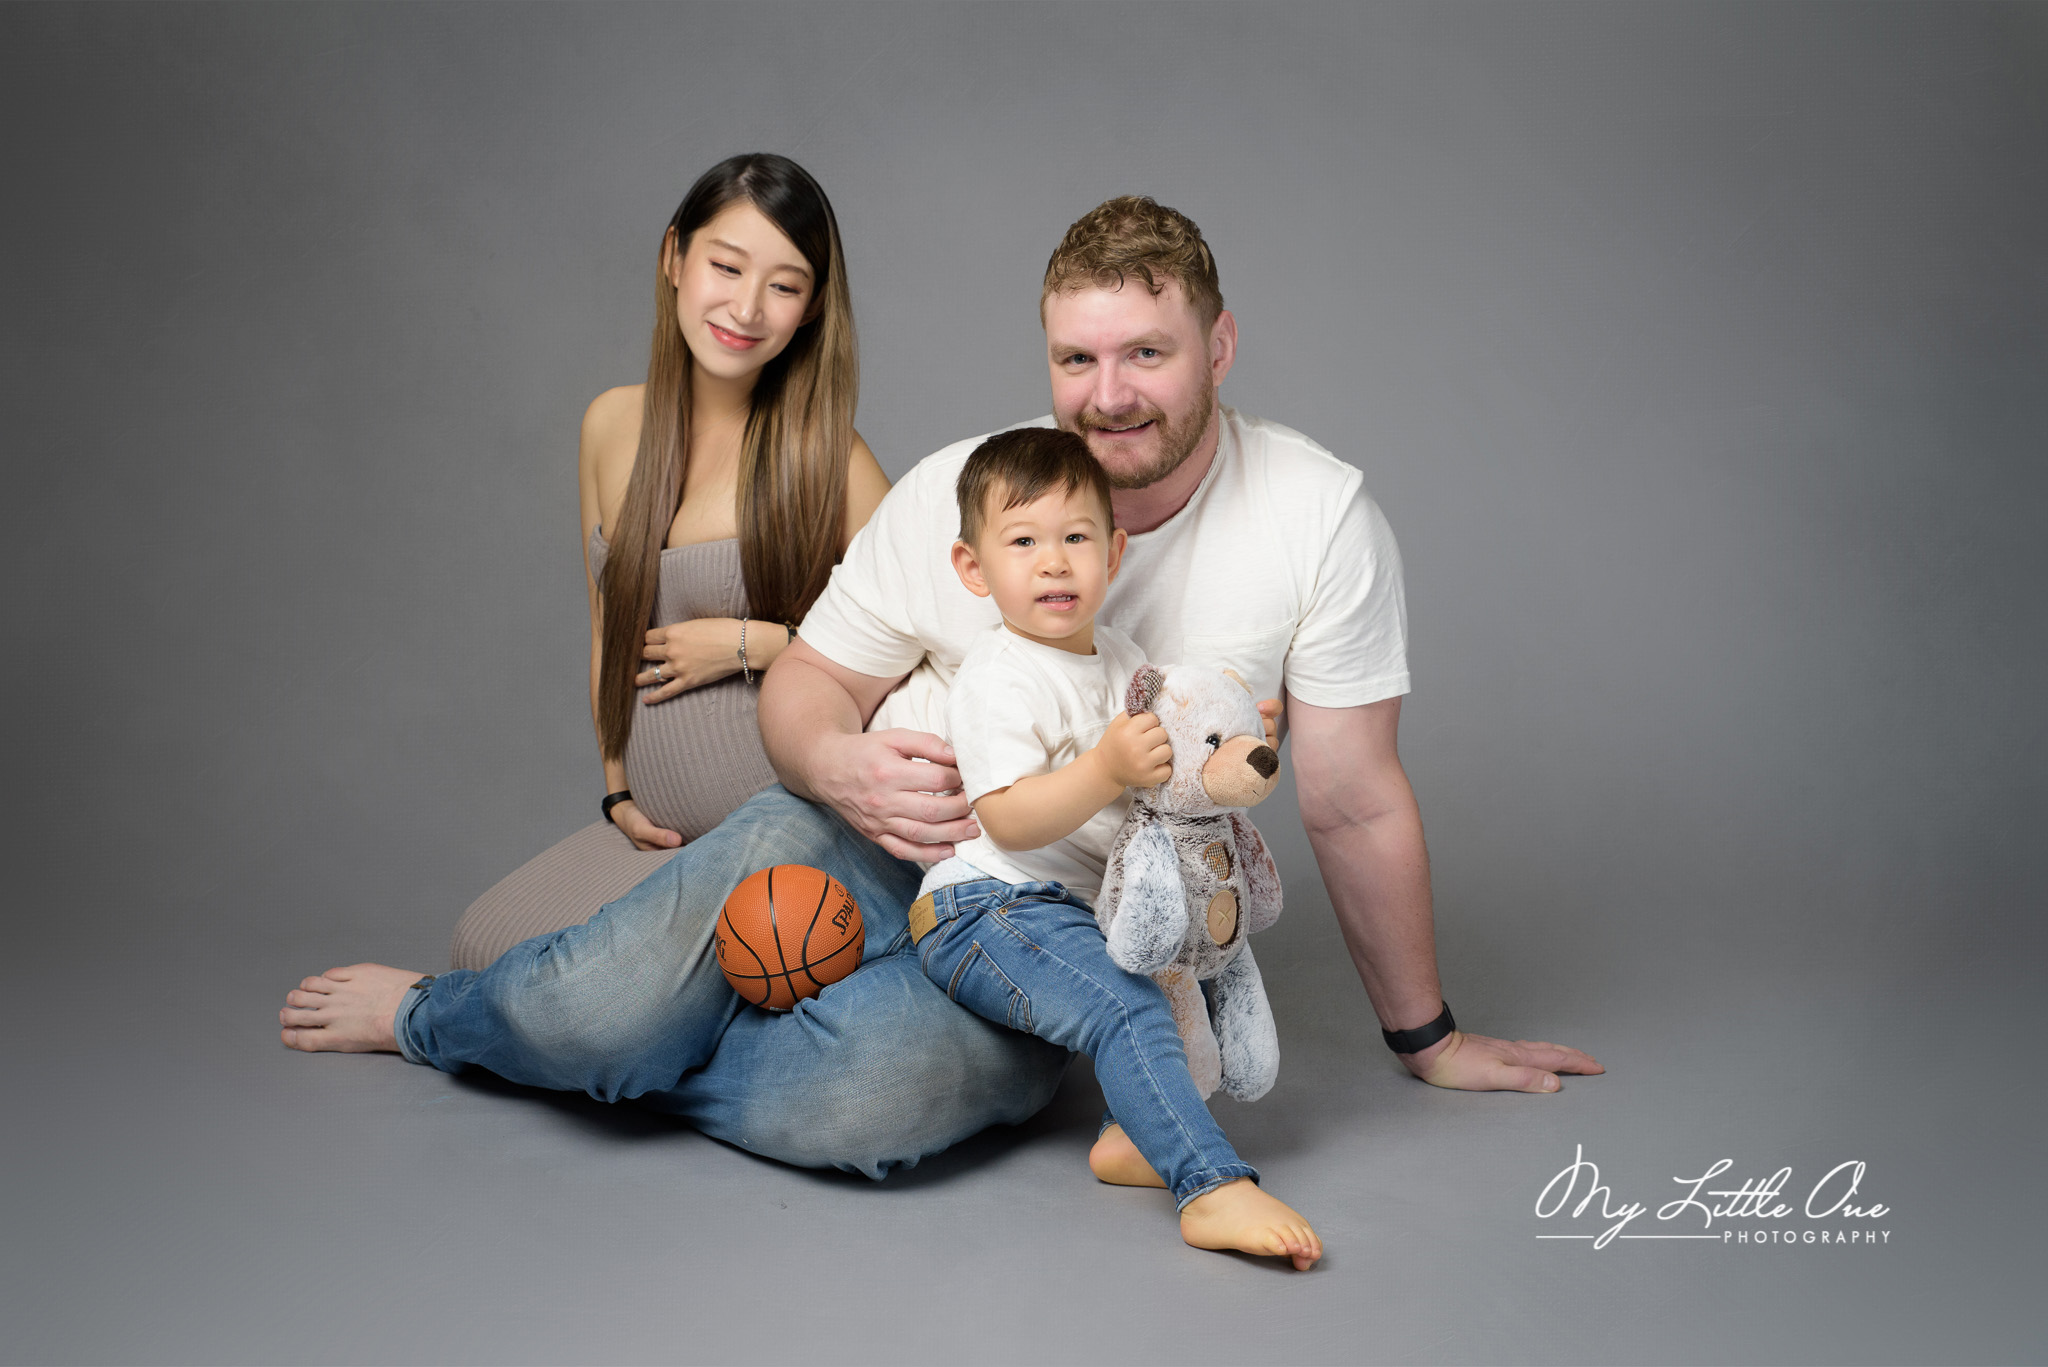 Choose The Right Professional For Your Family Photos